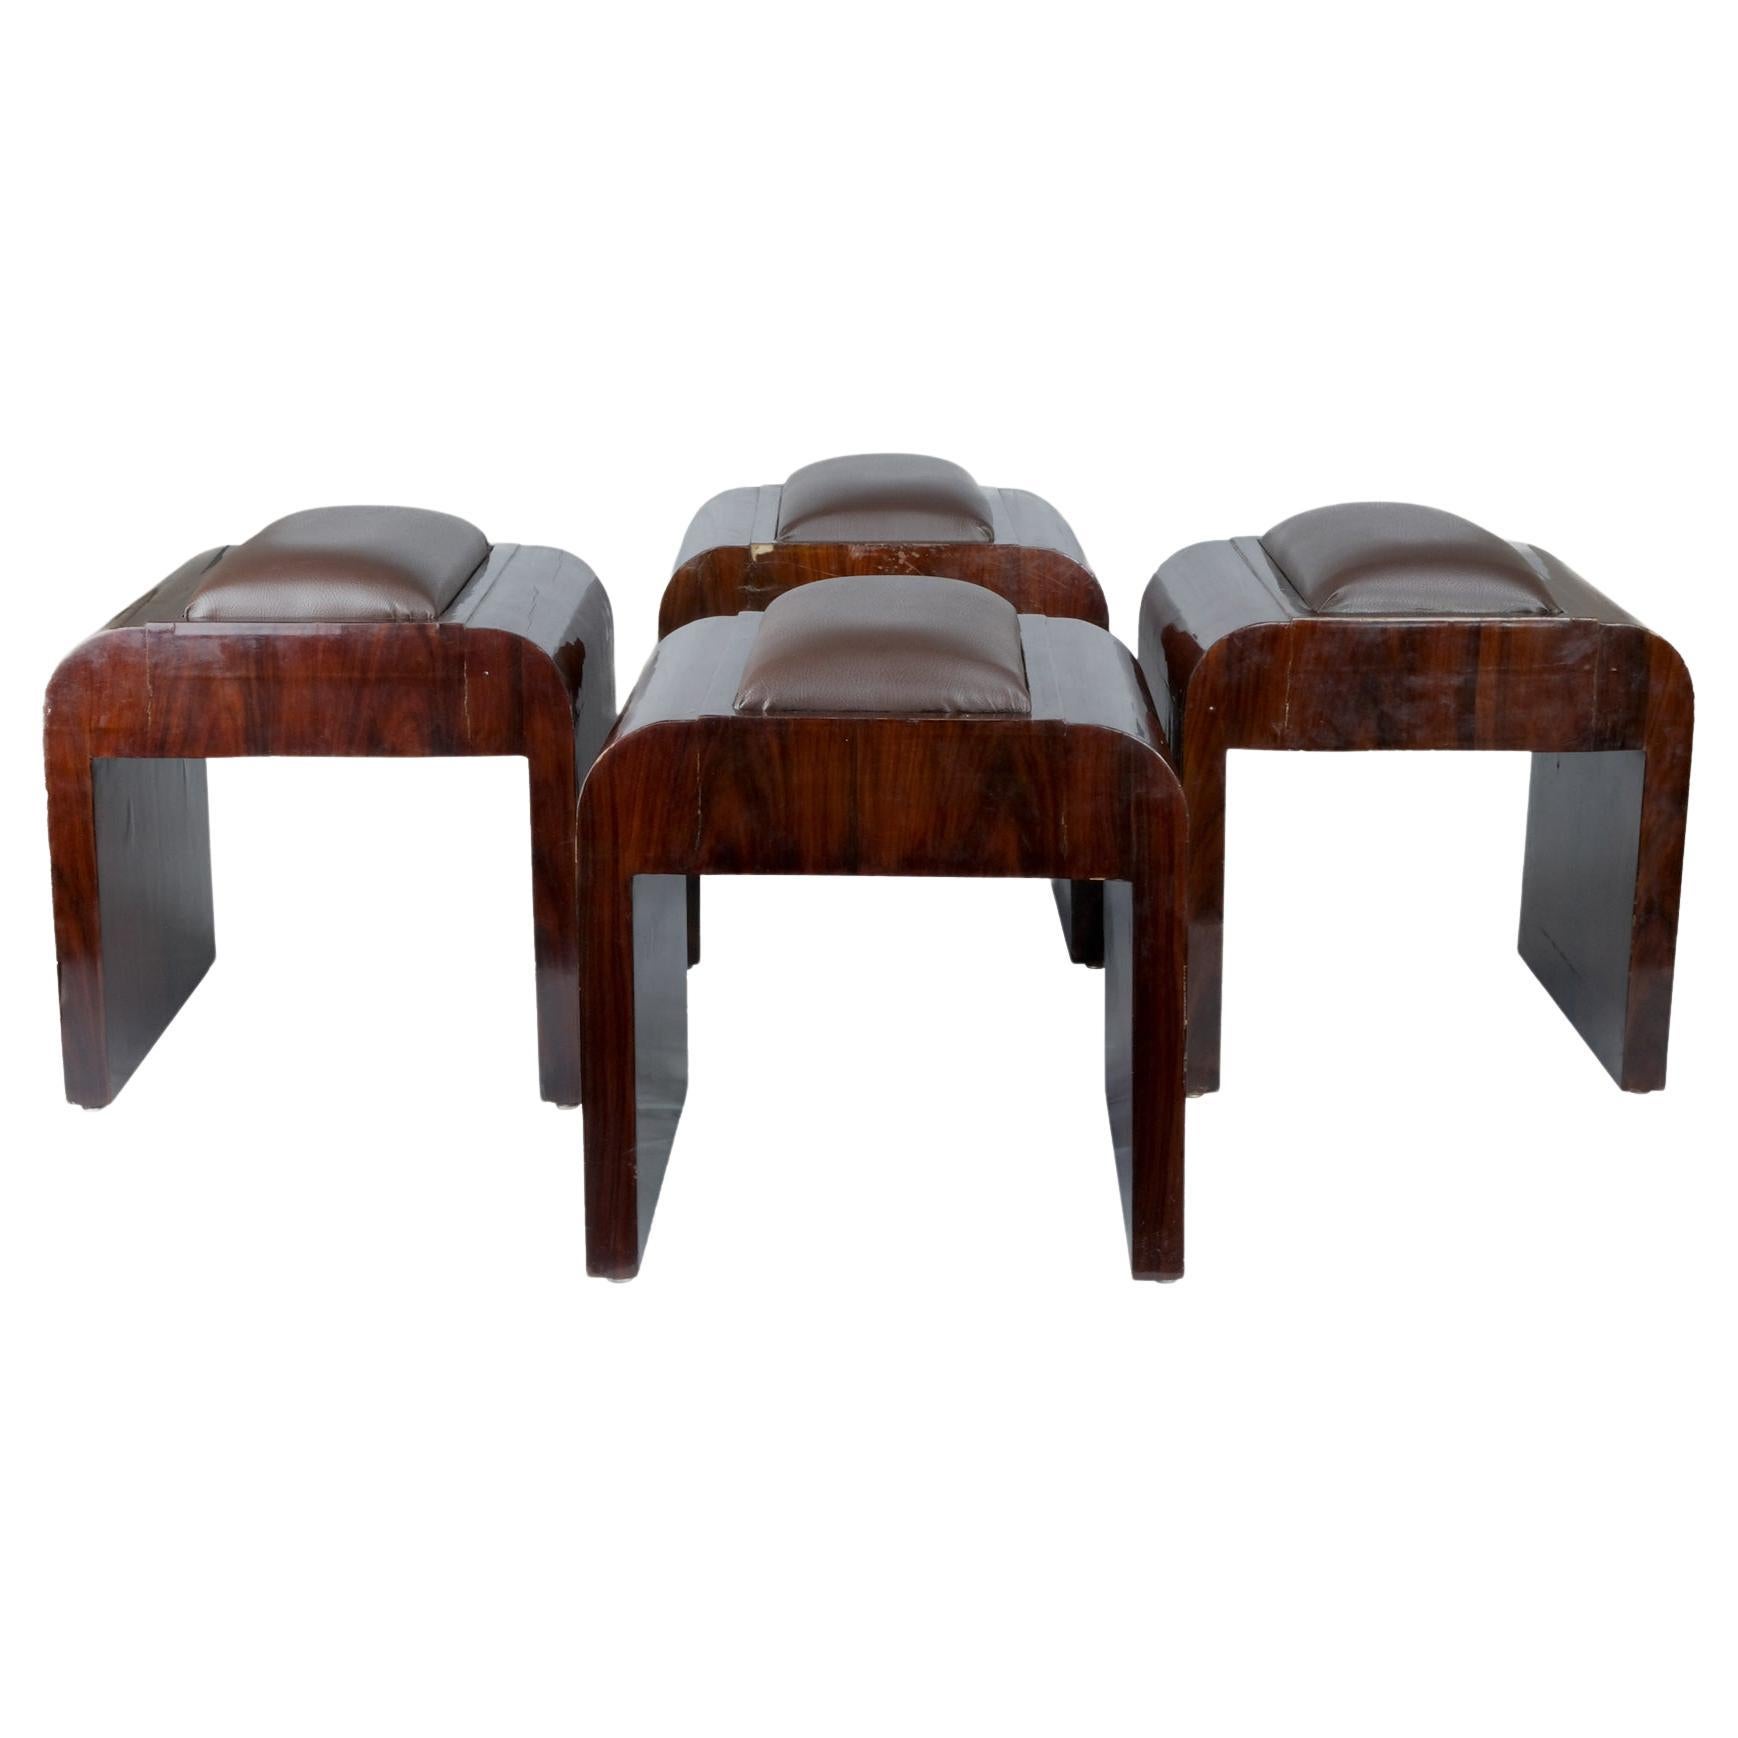 Four Art Deco stools from 1921, mahogany veneered wood trimmed with leather. For Sale